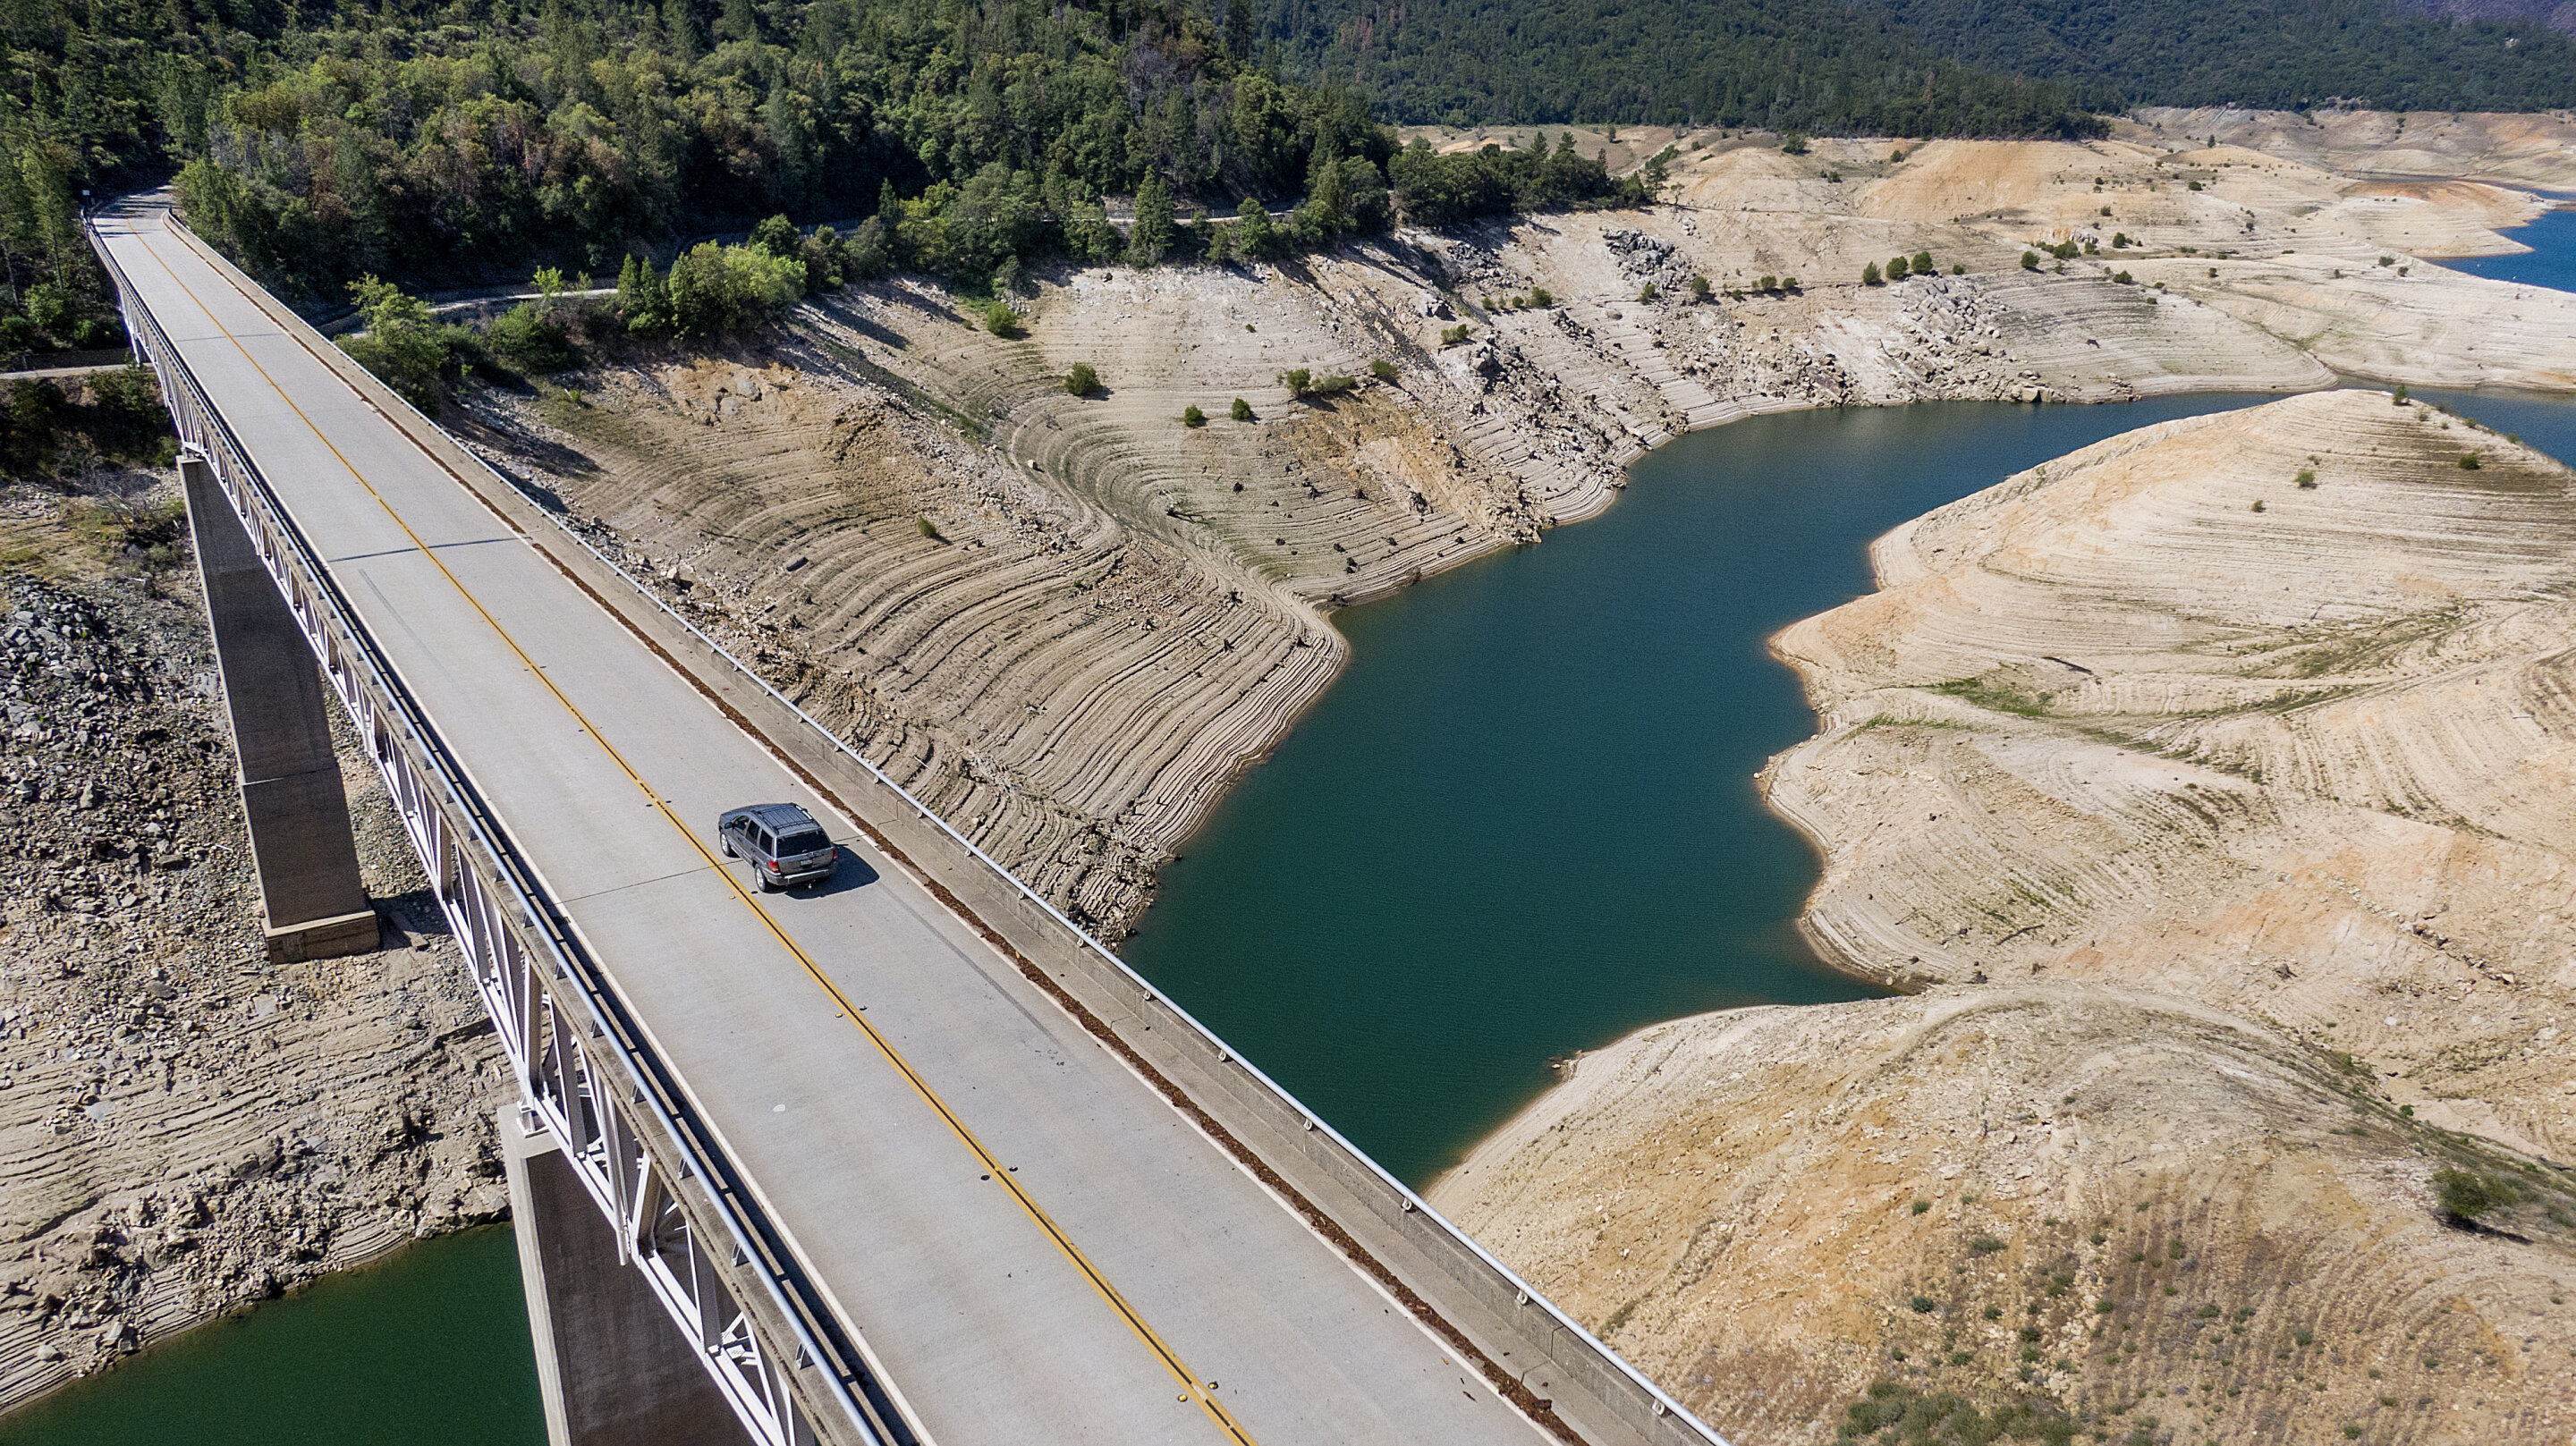 drought-saps-california-reservoirs-as-hot-dry-summer-looms